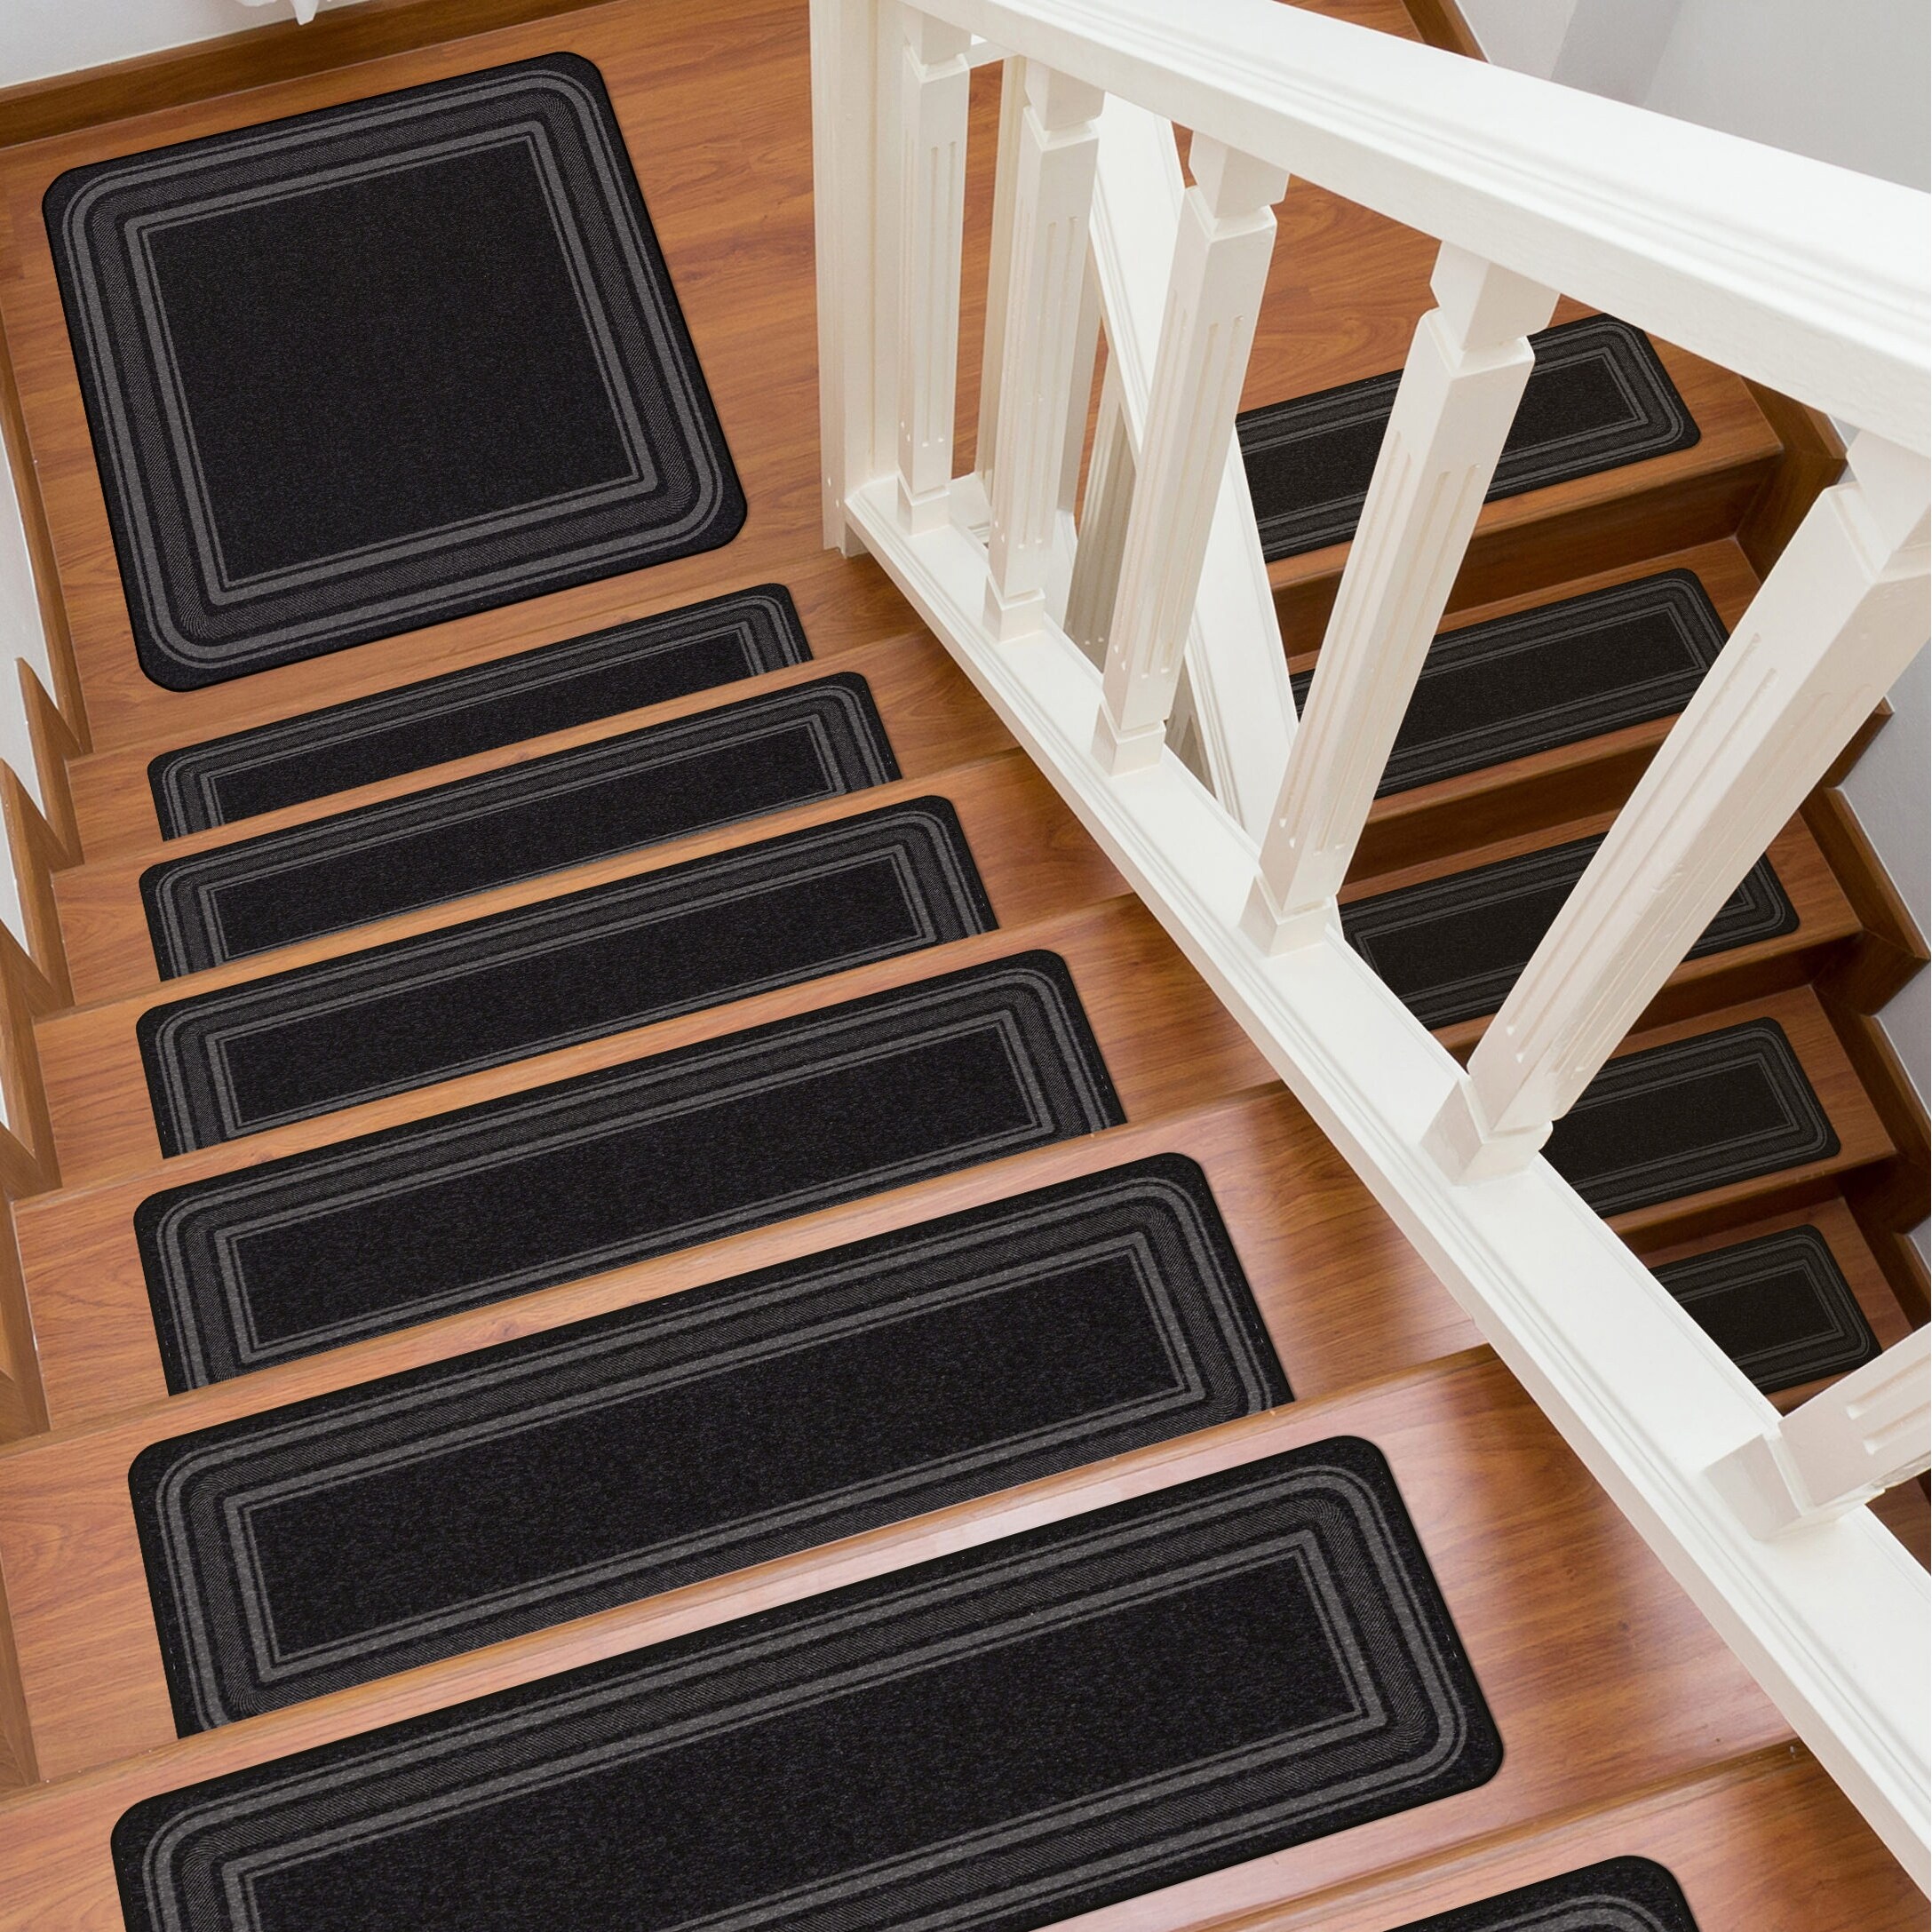 https://ak1.ostkcdn.com/images/products/is/images/direct/3dba2702d673bdb780da0059a01ee83c4db46782/Beverly-Rug-Non-Slip-Bordered-Stair-Treads-w--Matching-Landing-Mat.jpg